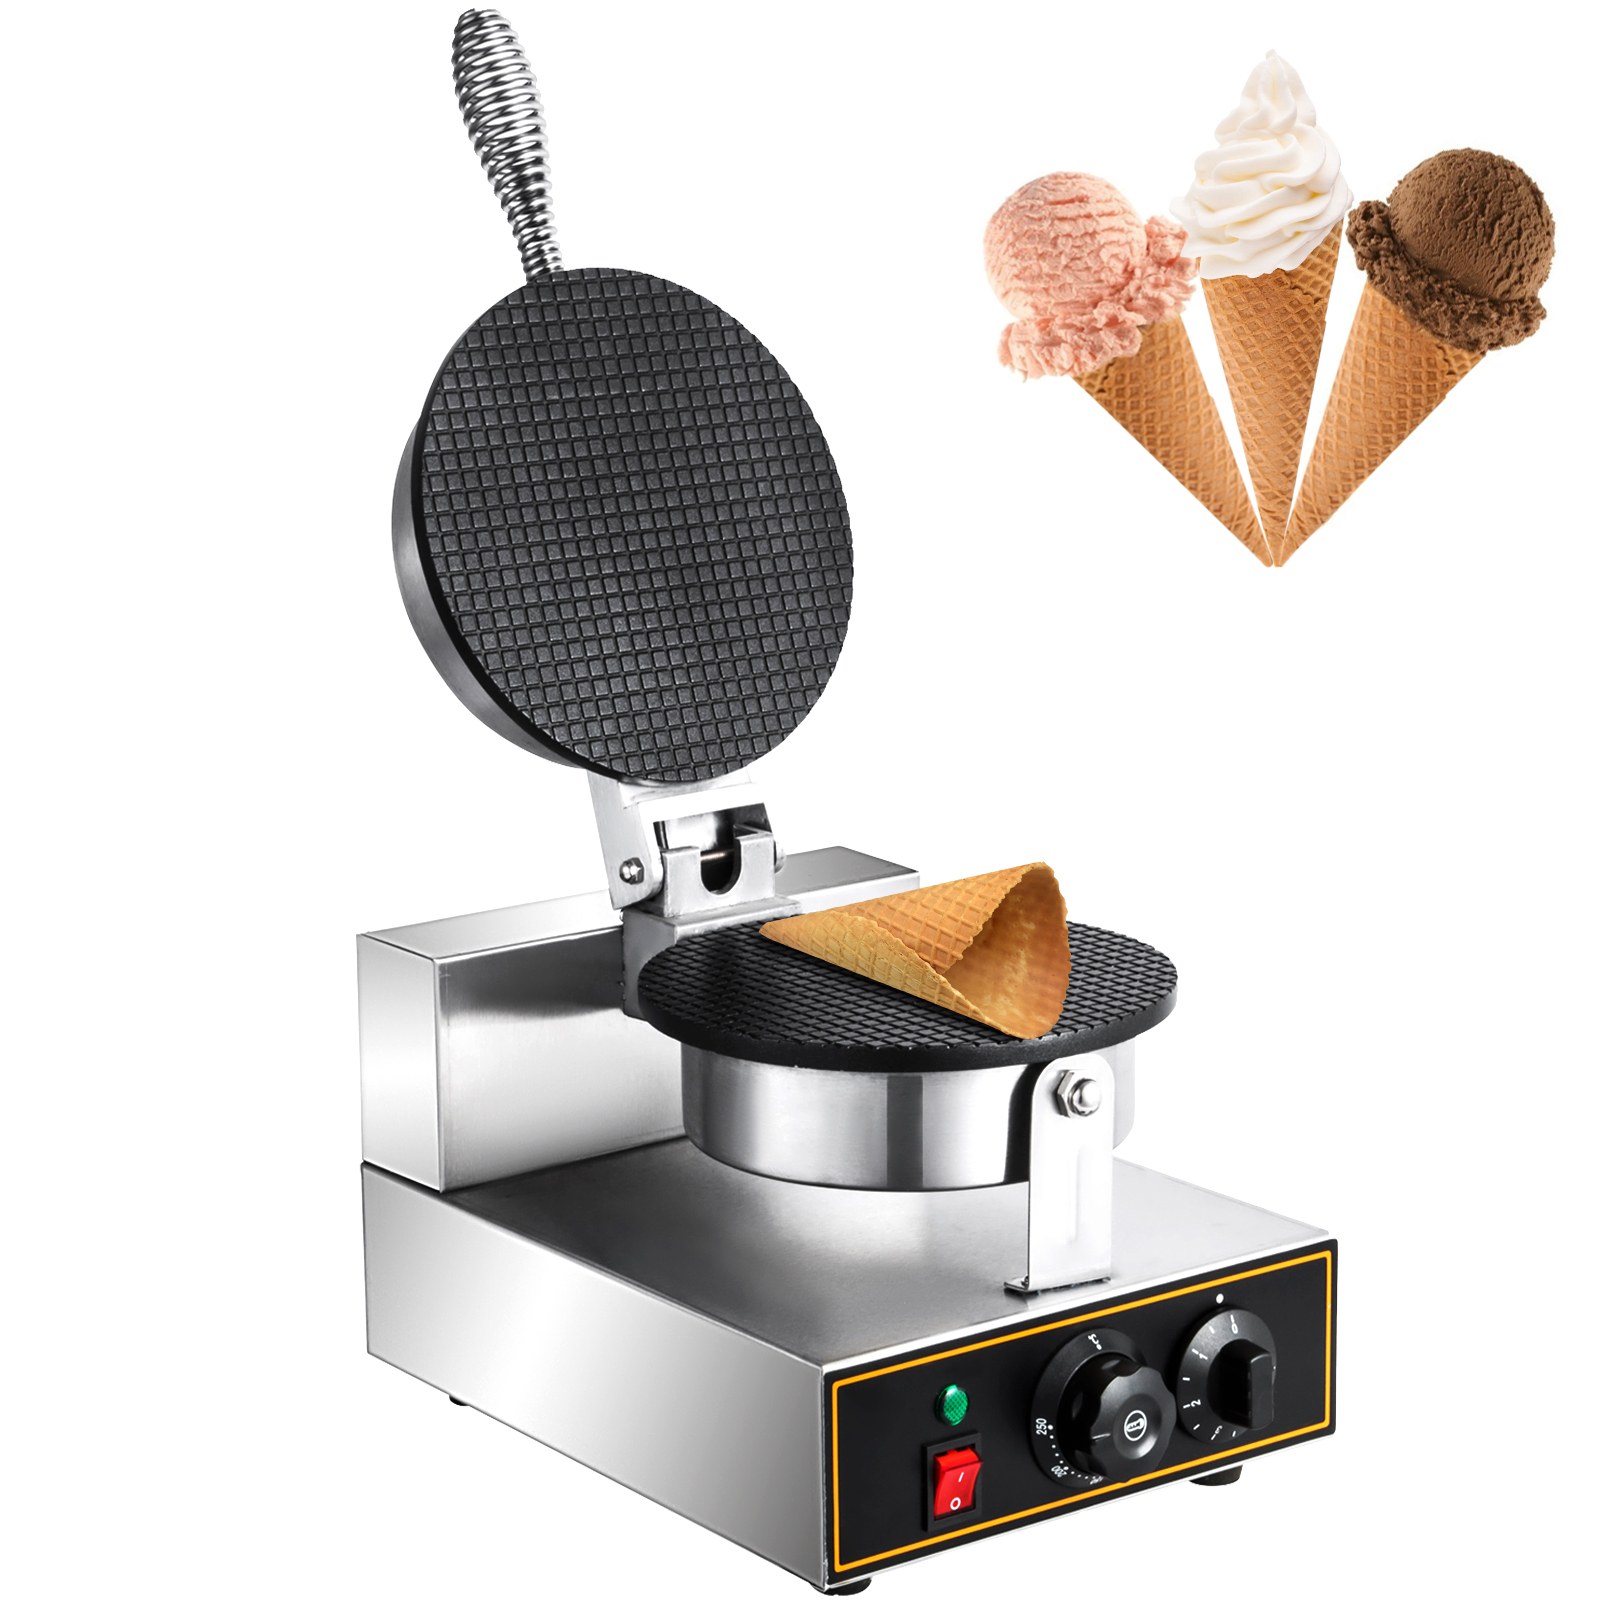 egg bubble waffle maker, stainless steel, 1400w